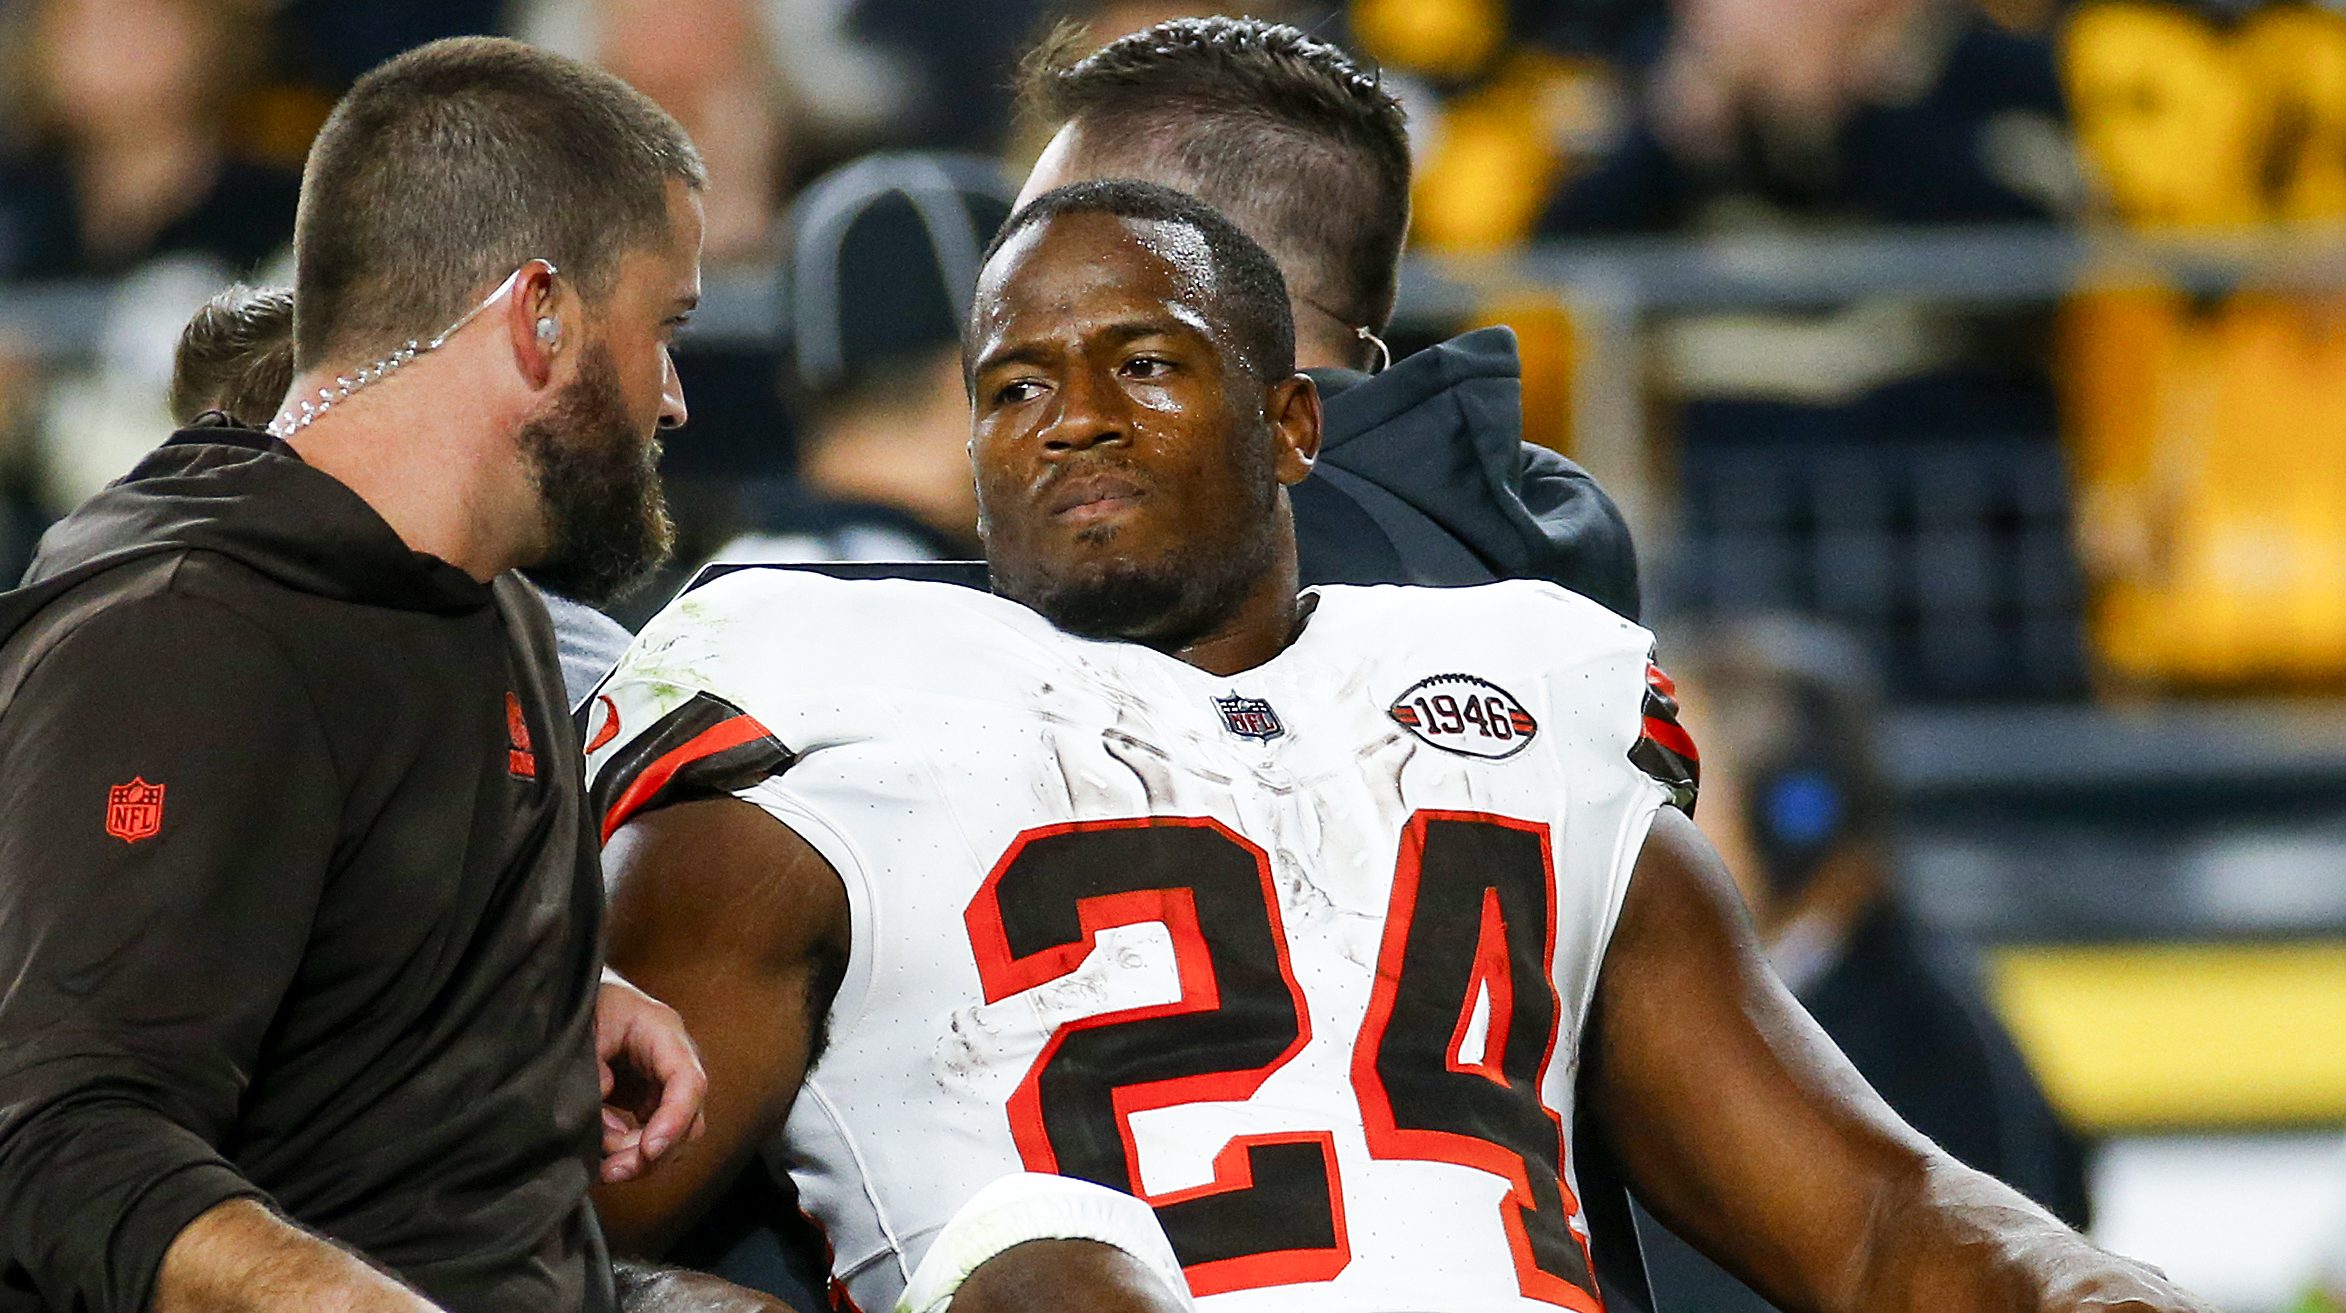 NBC Chicago experiences on the NFL group’s response to Chubb’s knee harm